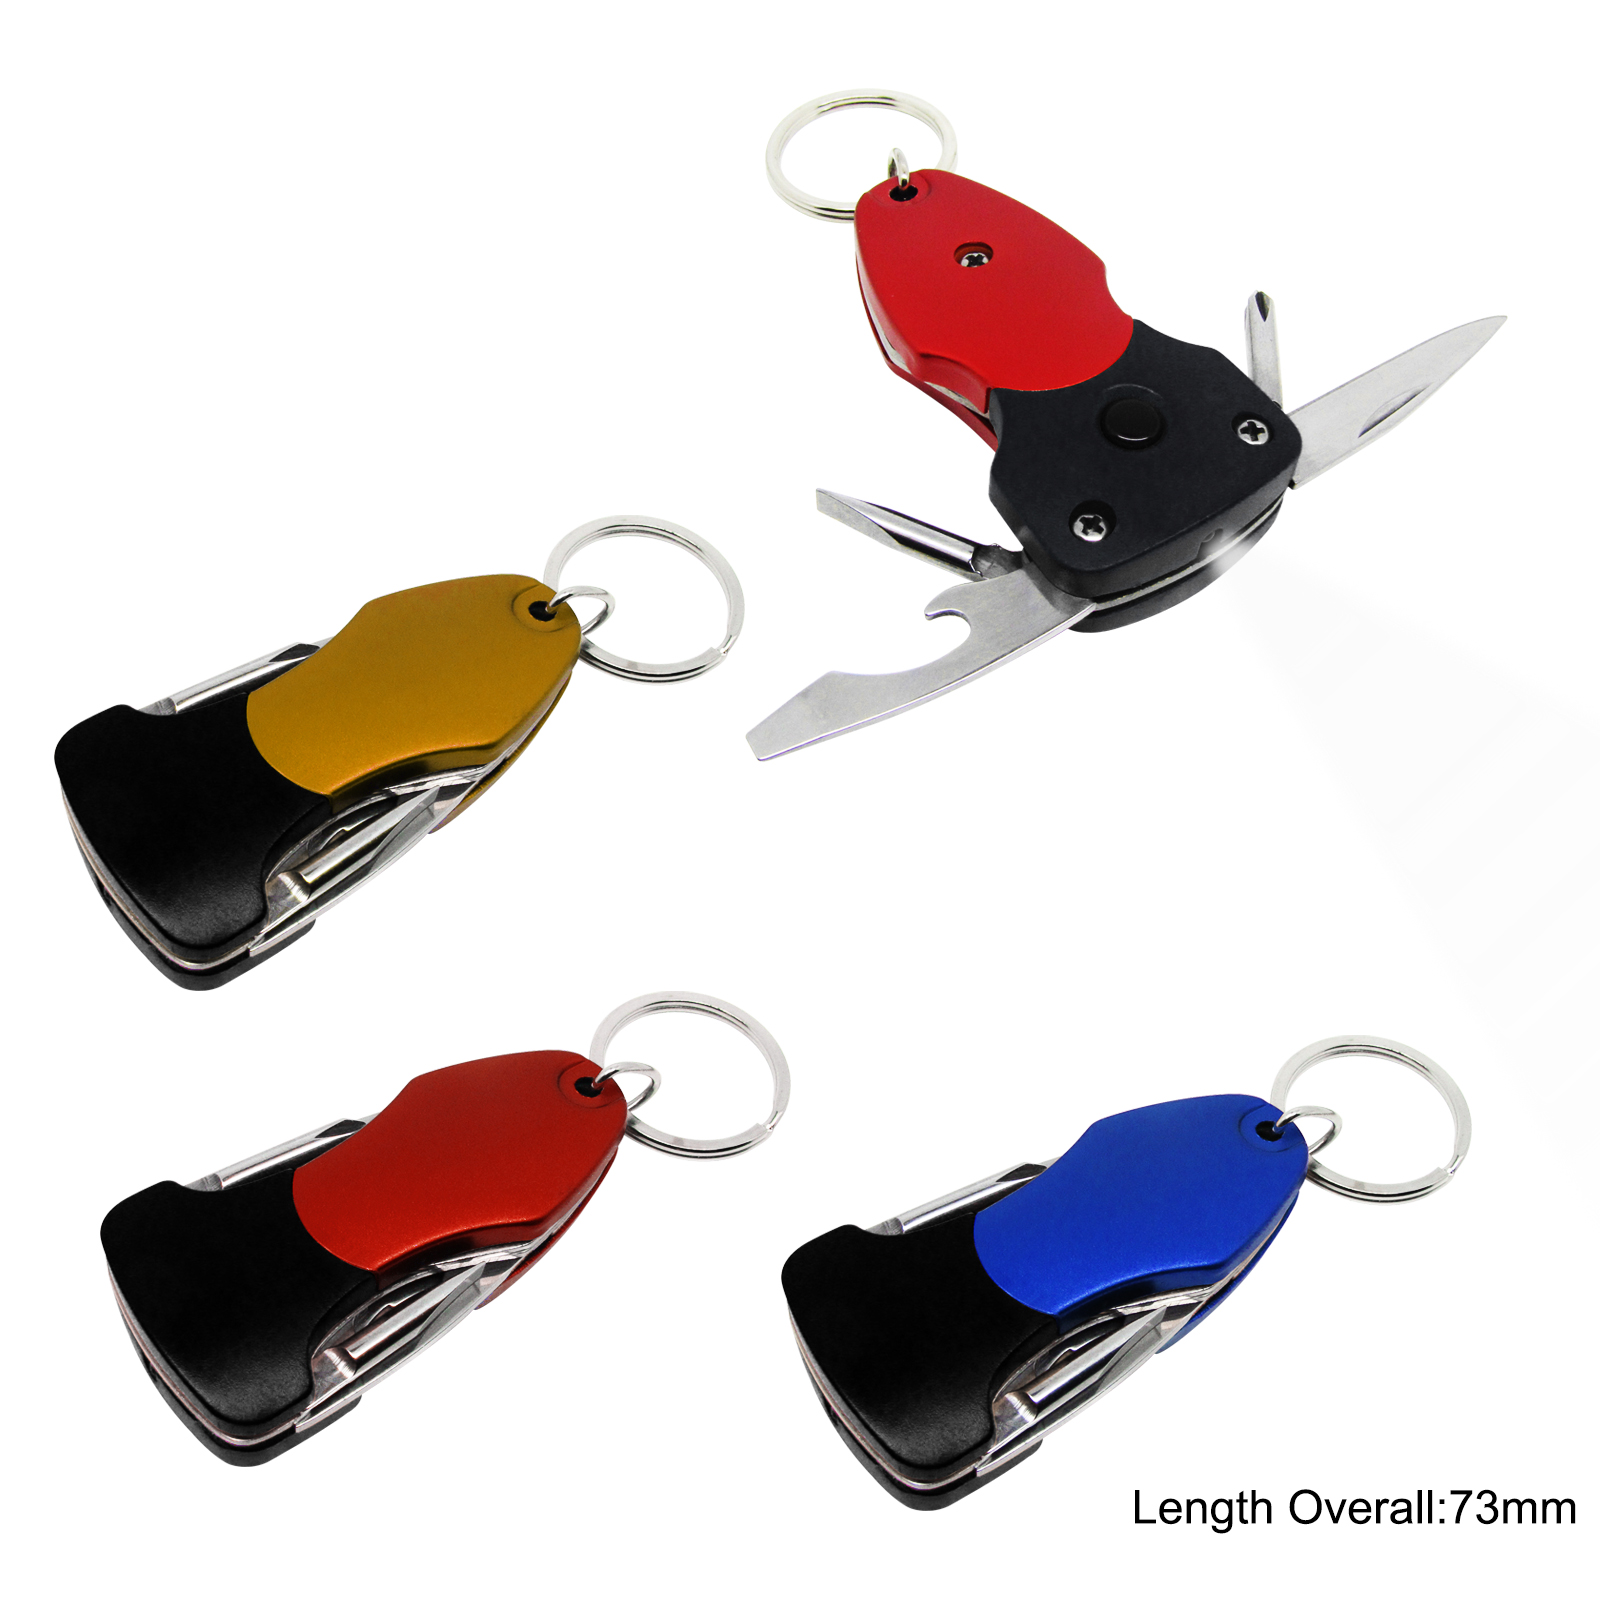 #6128 Multi Function Key Chain Tools with LED Torch 